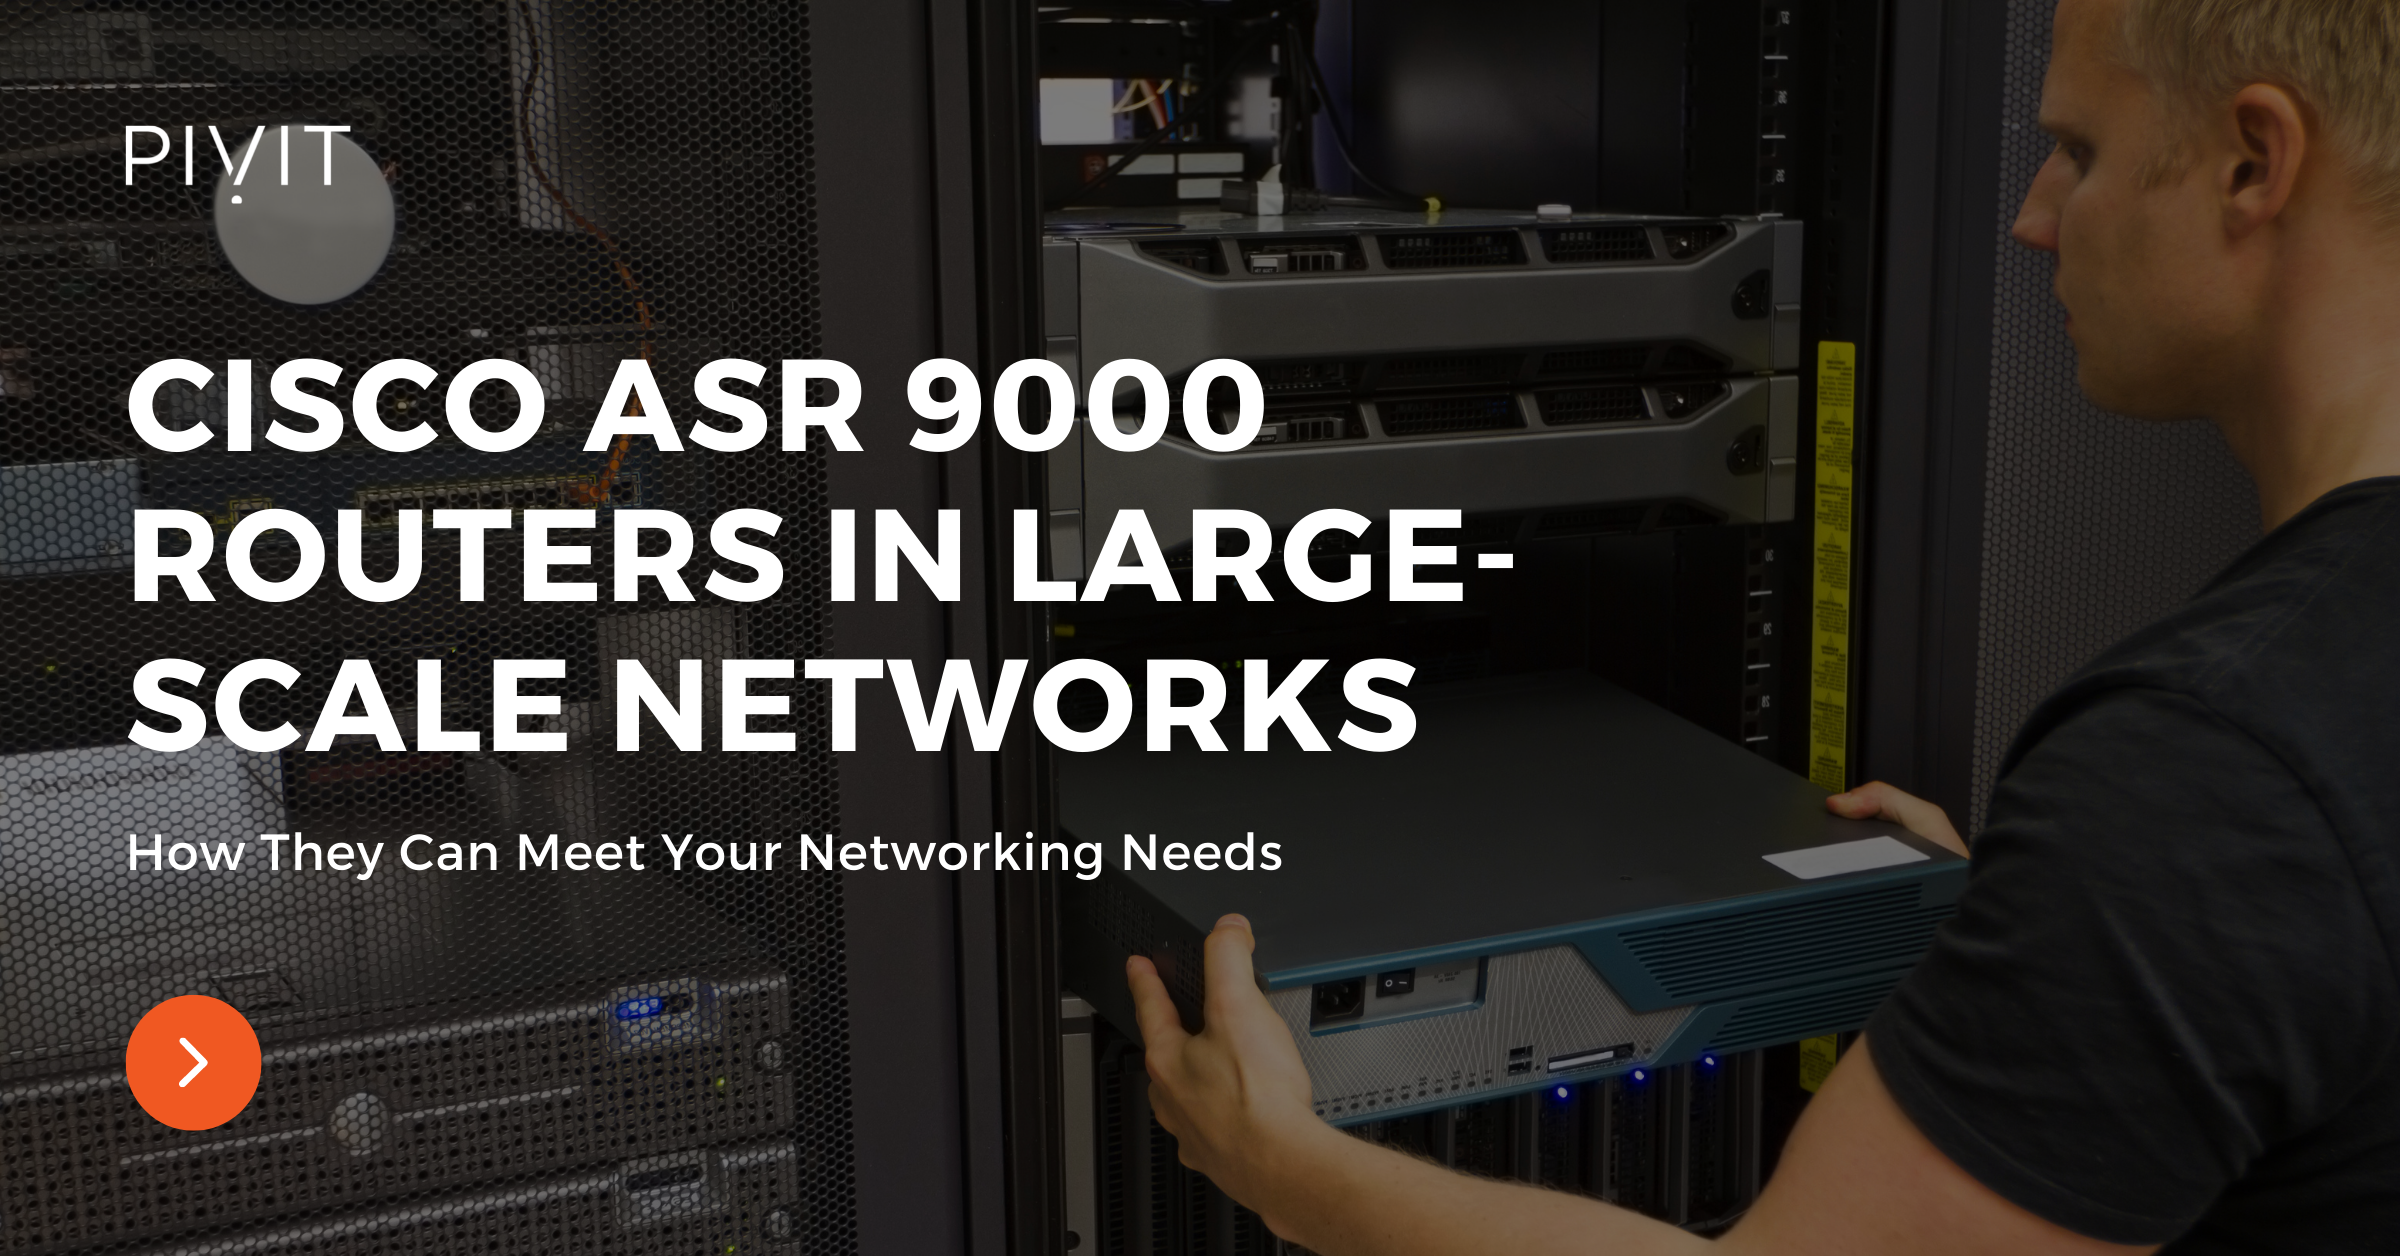 How Cisco ASR 9000 Routers Meet the Needs of Large-Scale Networks